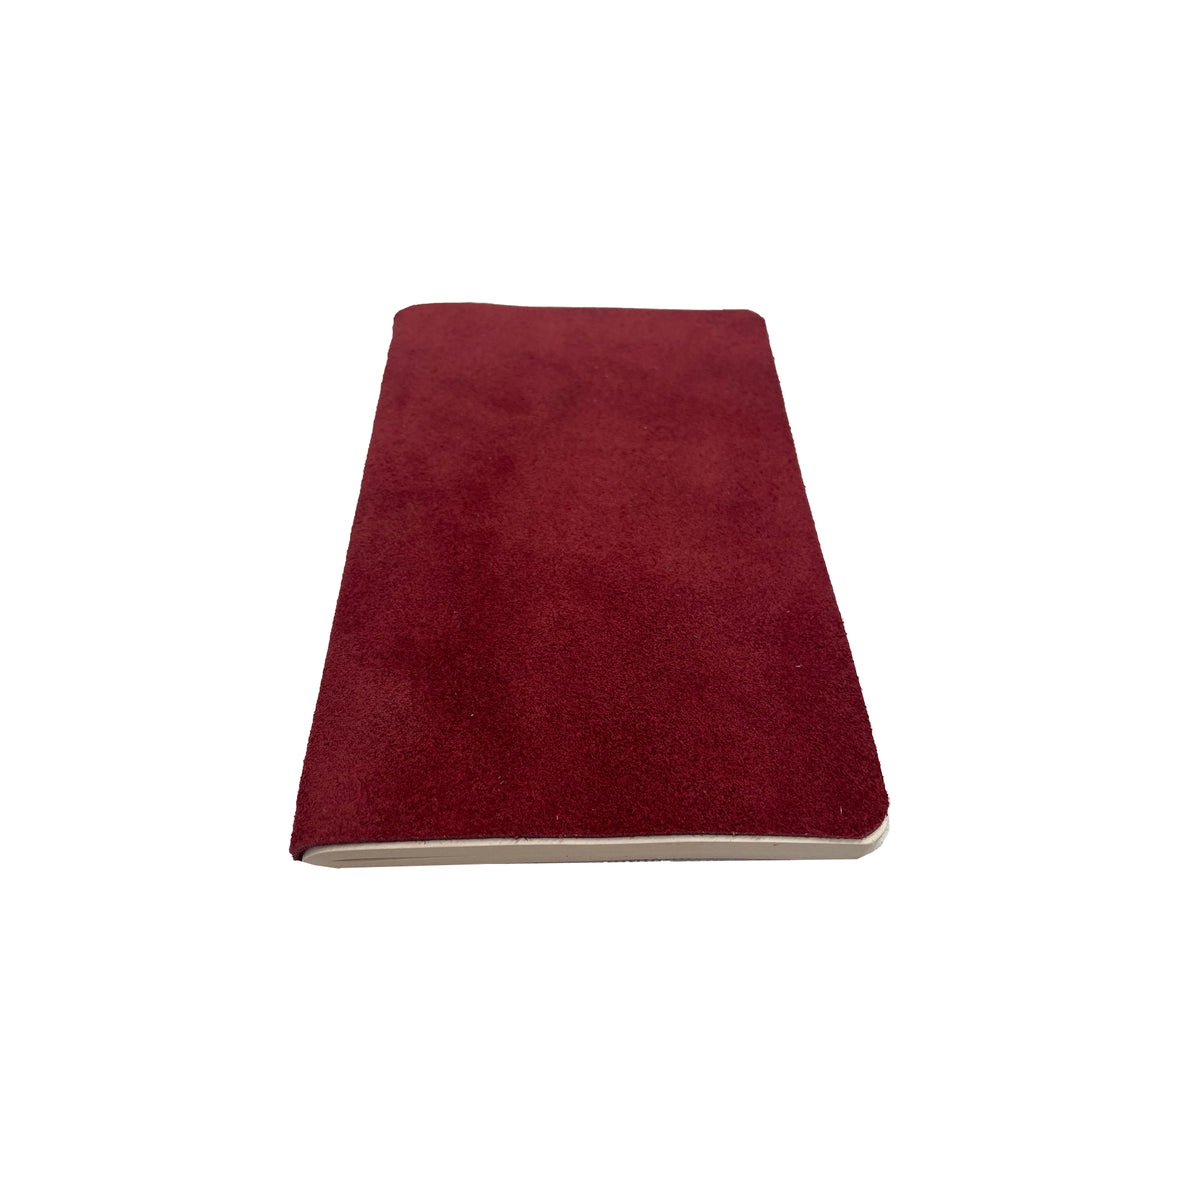 Joaquin Leather Writing Journal - Maroon Suede - Notbrand